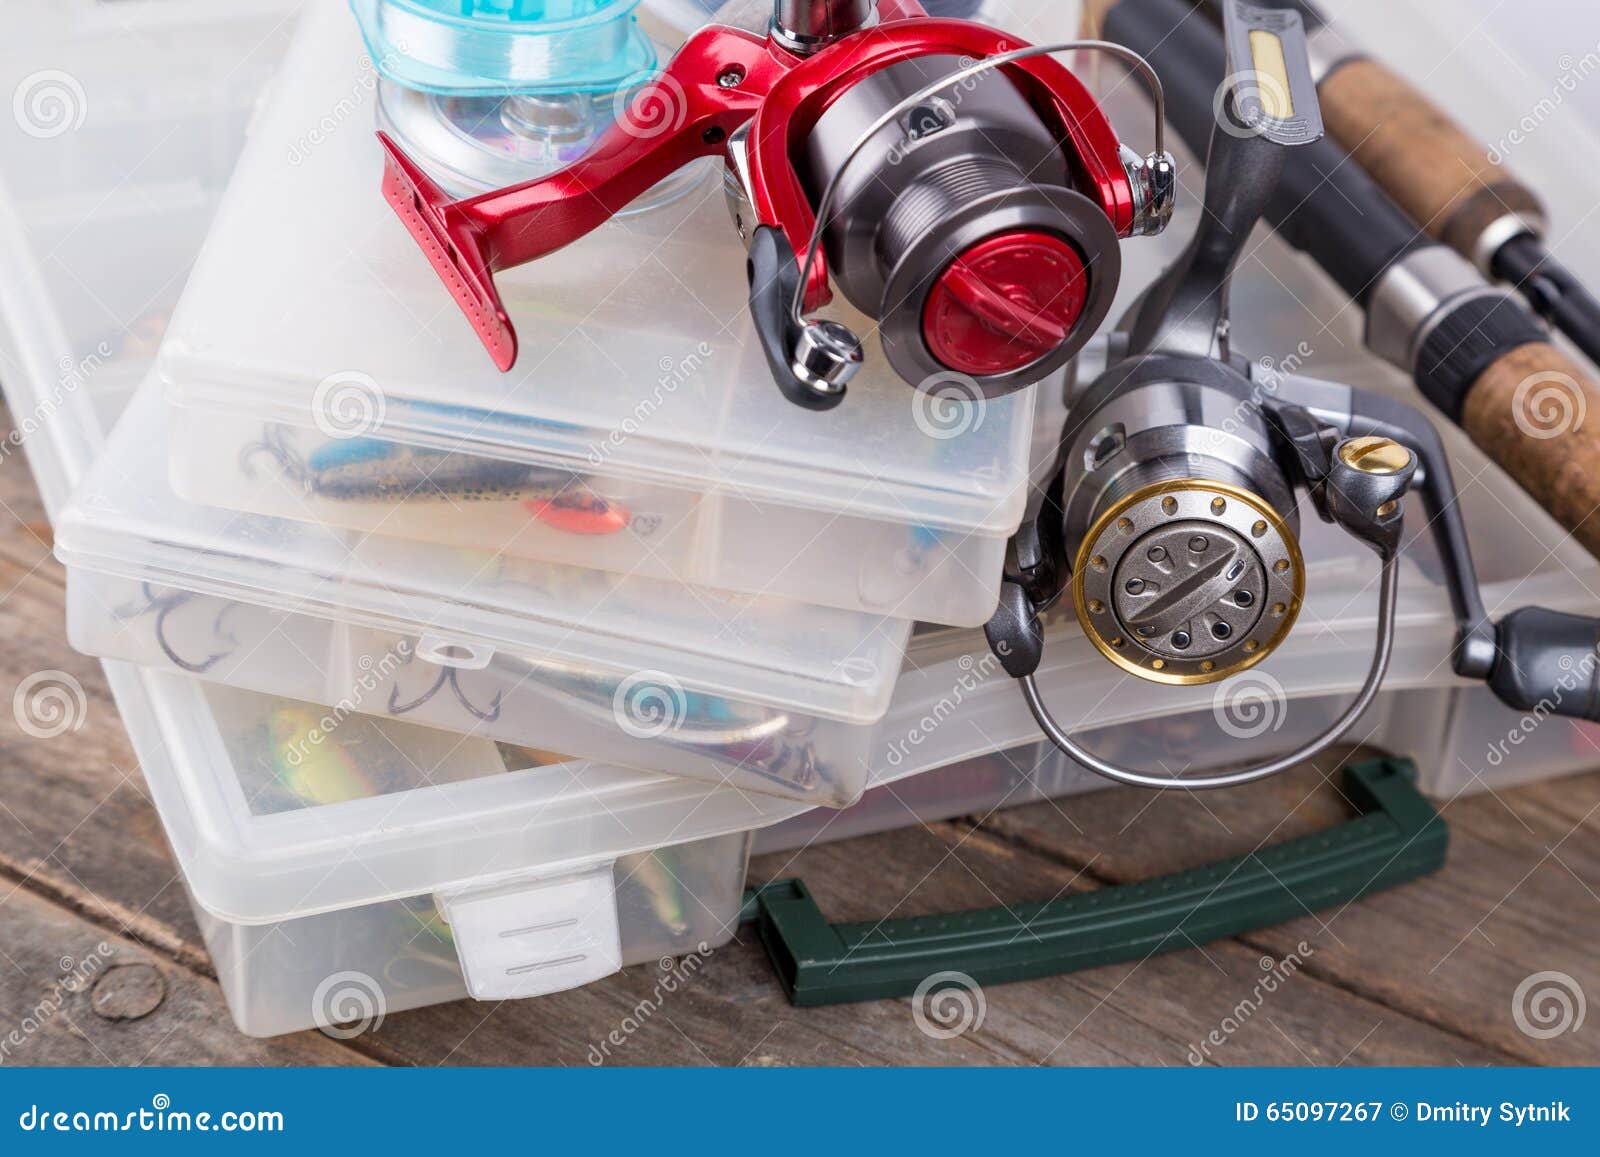 Fishing Tackles And Lures, Baits In Storage Boxes Stock ...